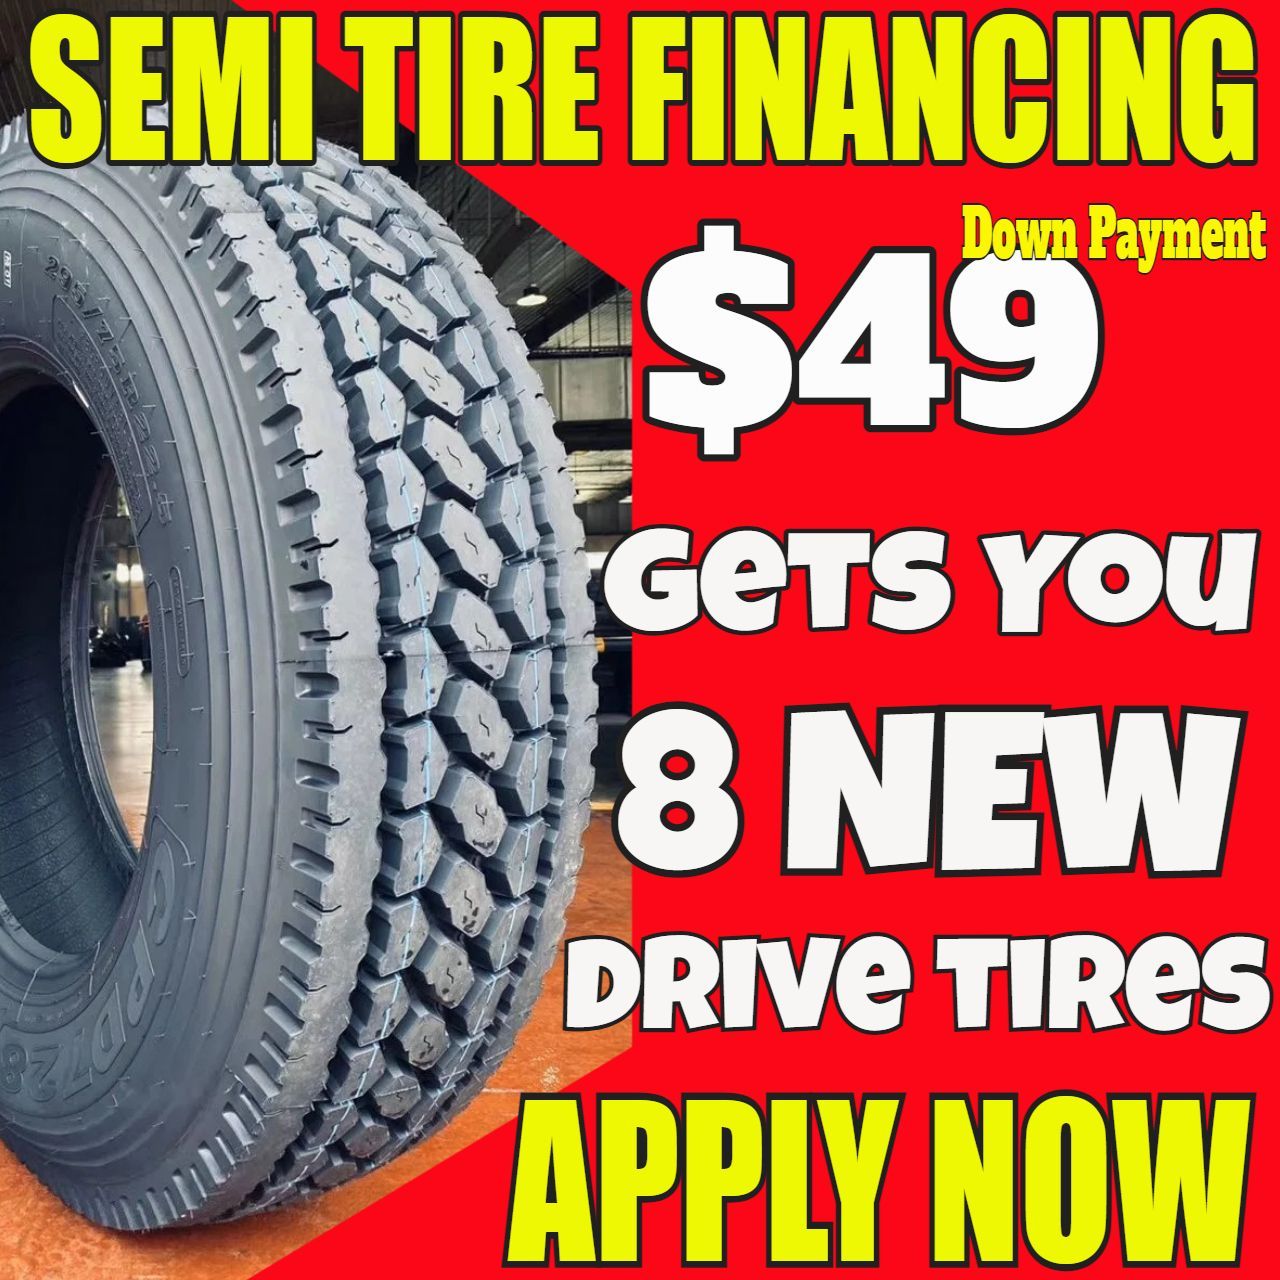 Commercial semi-truck tires in Eugene, OR. 18-wheeler Heavy-duty Big-Rig trucking tires at Eugene, OR. Cheap tractor-trailer auto vehicle prices in Eugene, OR